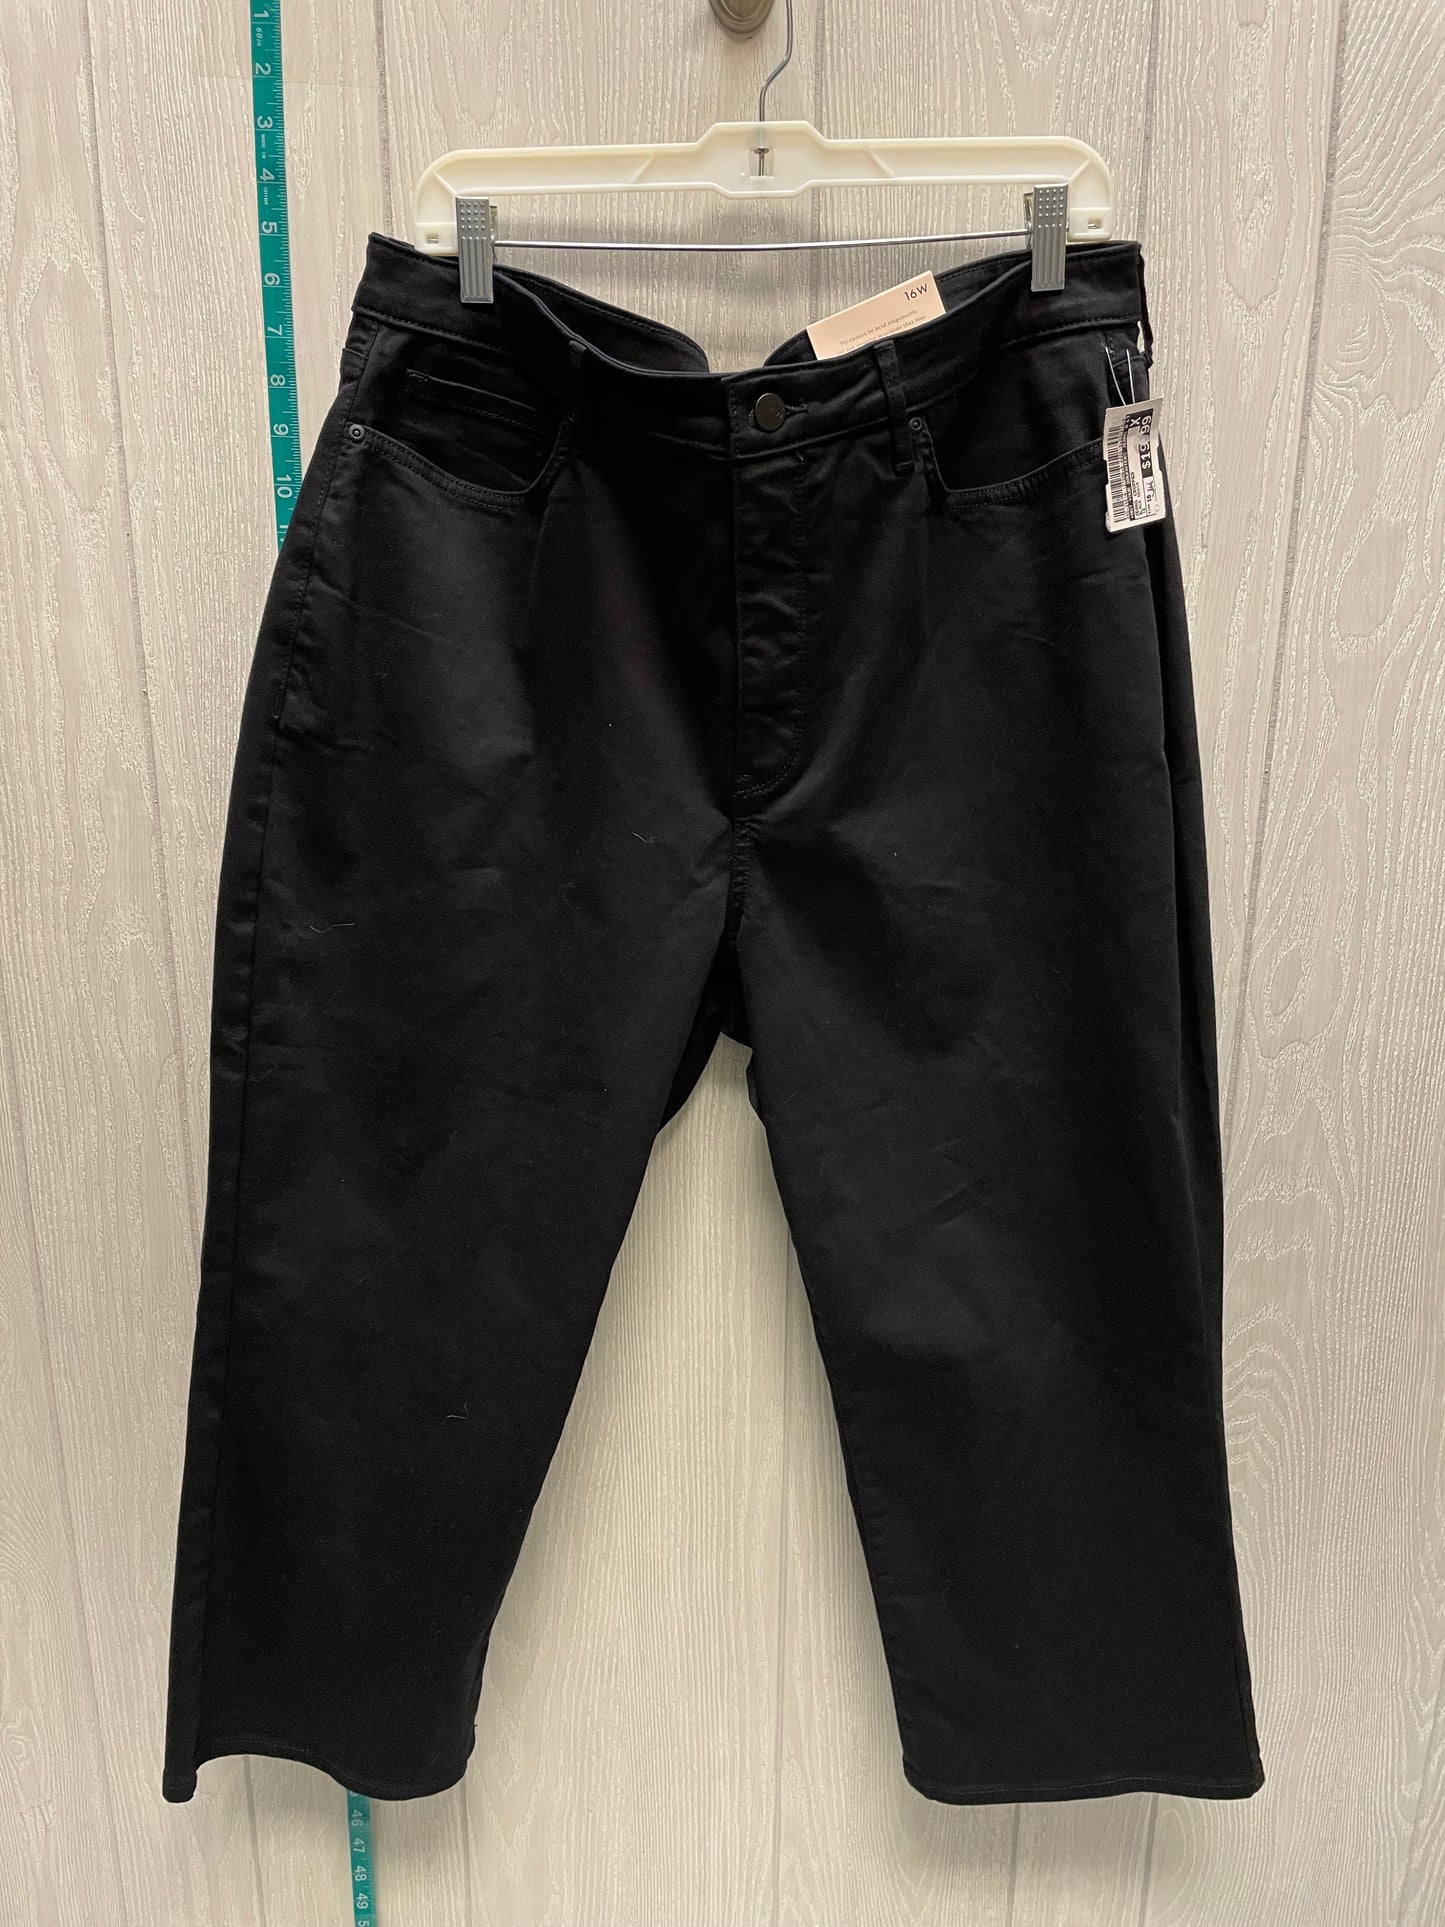 Black Denim Jeans Cropped Not Your Daughters Jeans O, Size 16